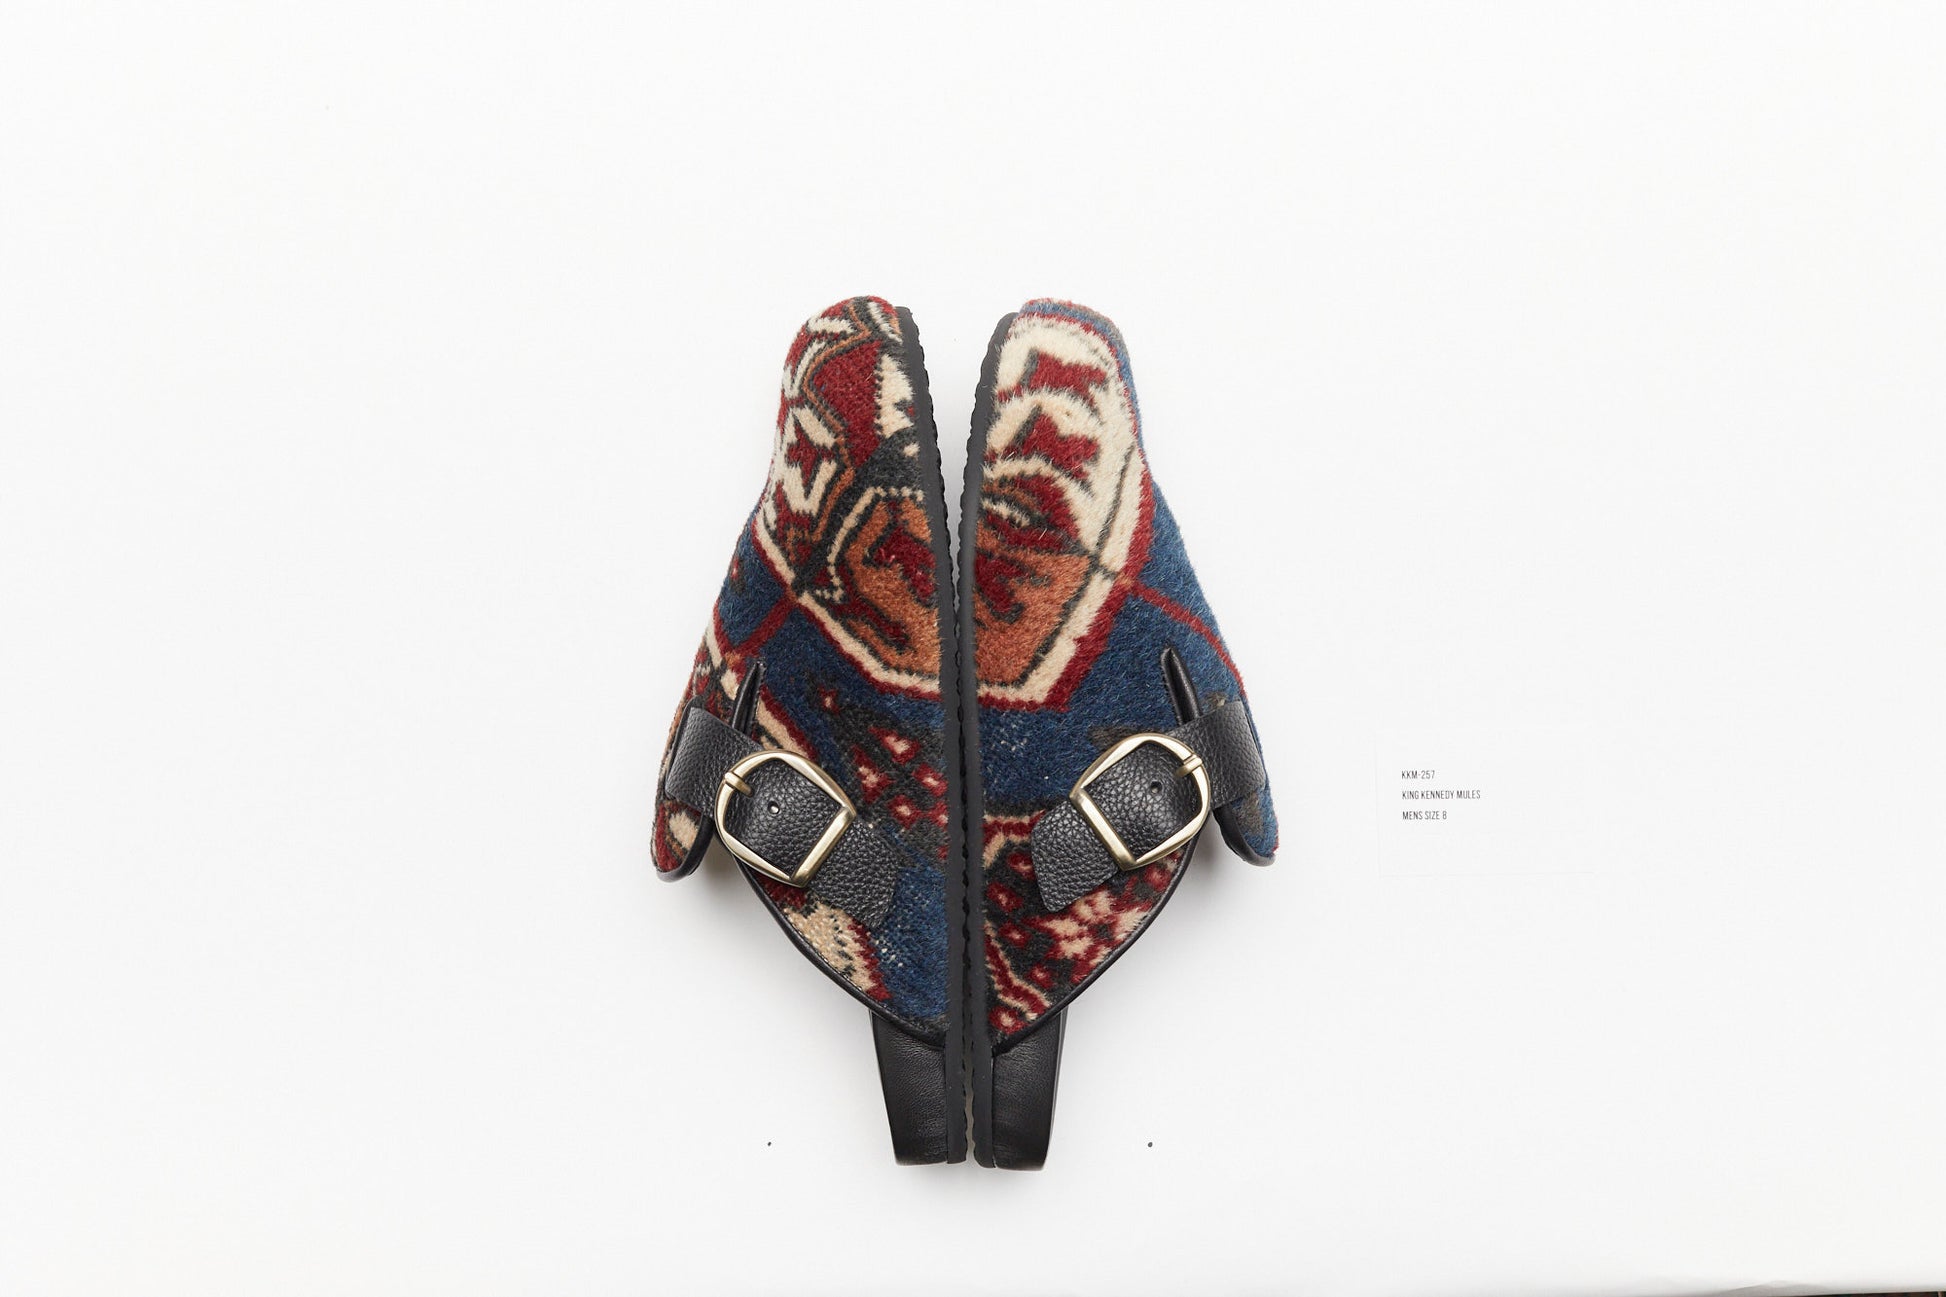 Buckle side view of rug mules.  King Kennedy Rug Mules are one-of-a-kind and made of 100 year old antique Persian rug fragments with soft lambskin footbed and rubber sole. This pair is made of an antique Persian rug with deep blue base and cream, red and tan medallion designs. 